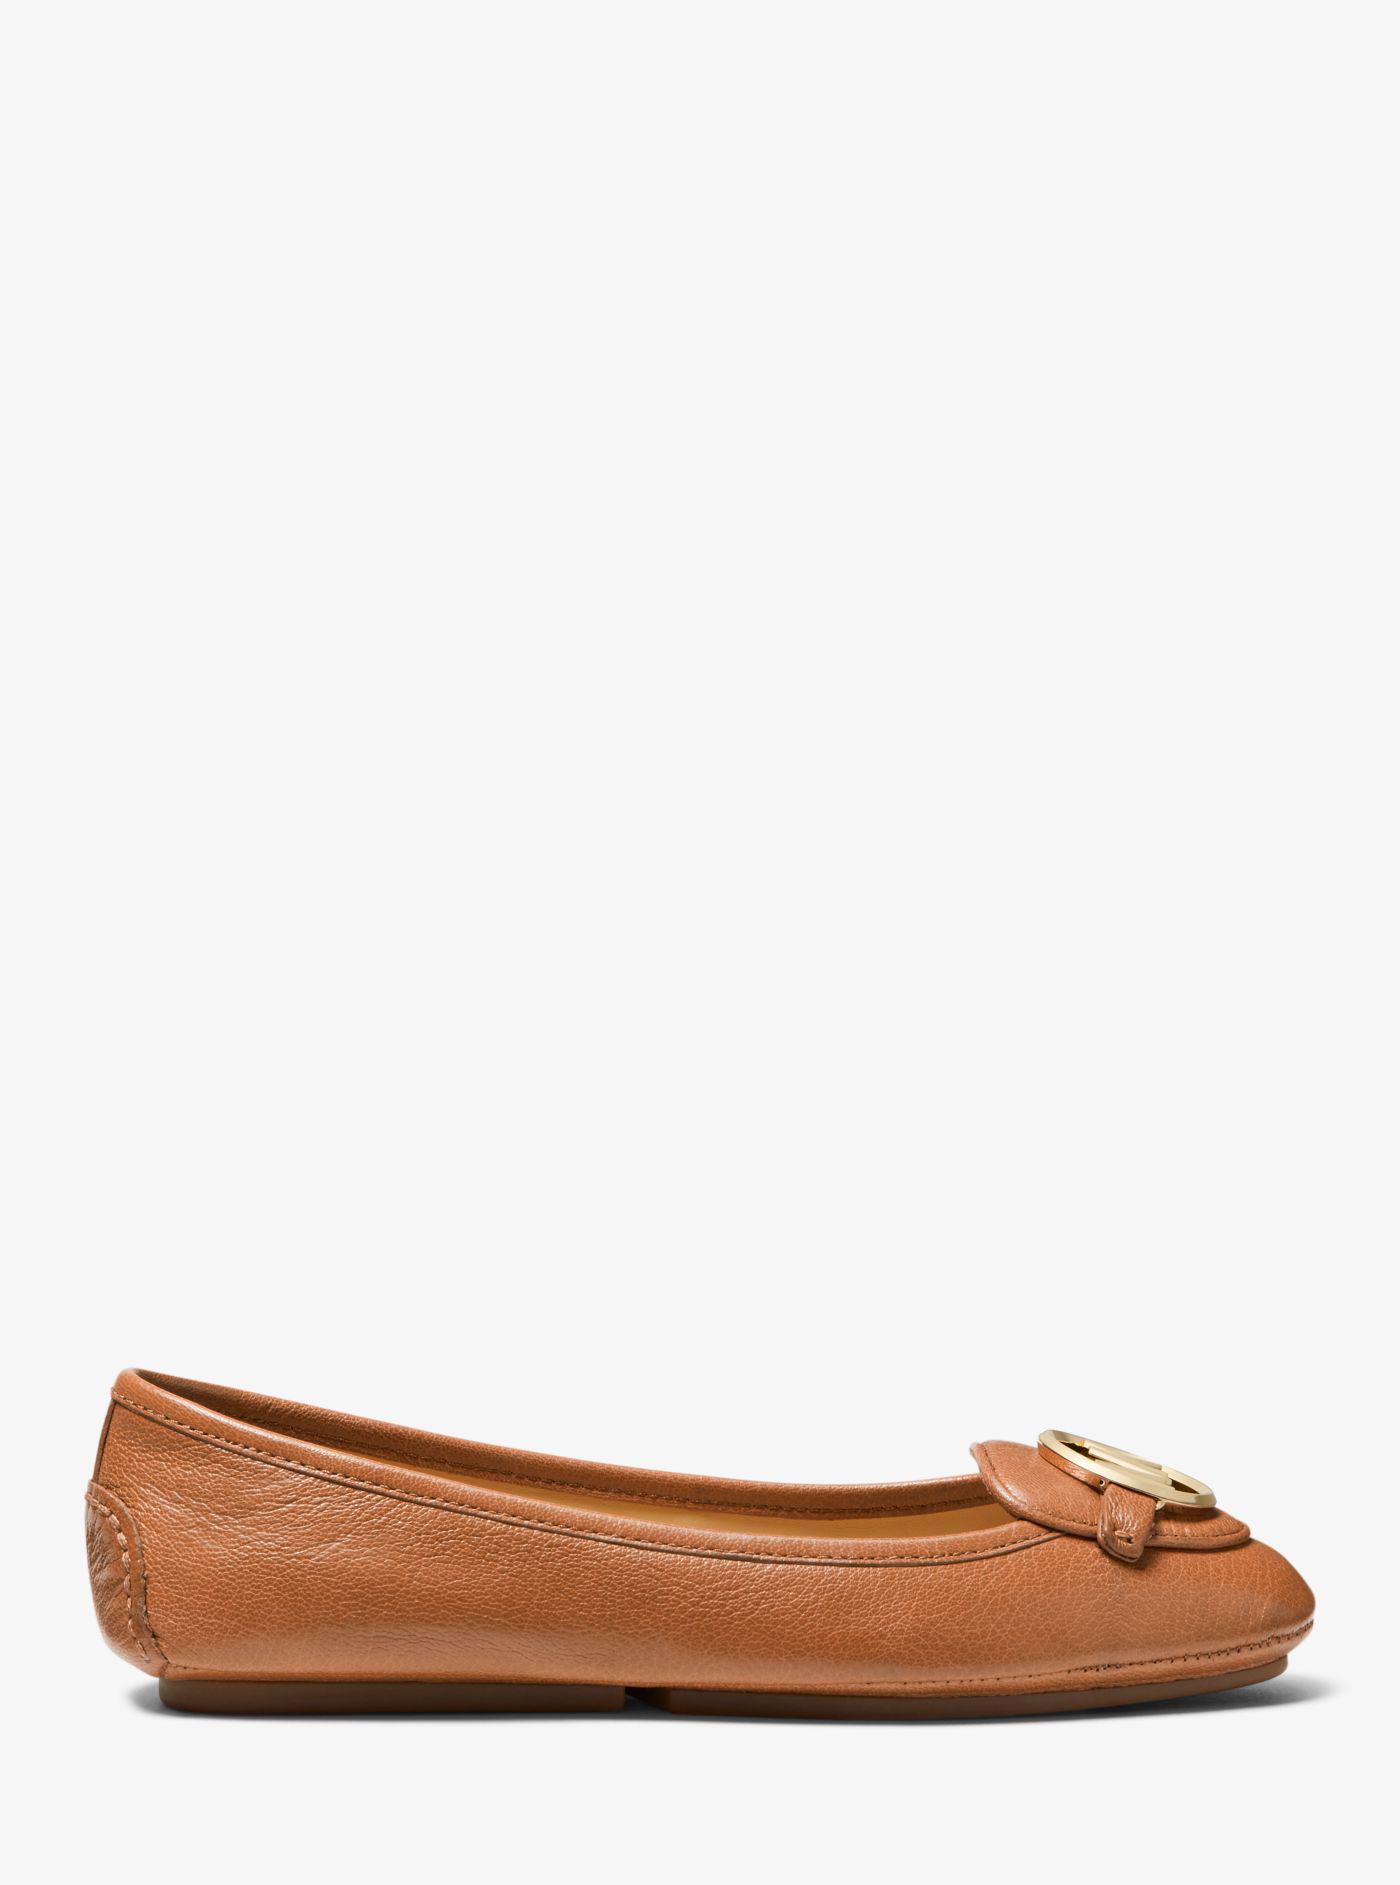 Michael Kors Lillie Leather Moccasin - Lyst